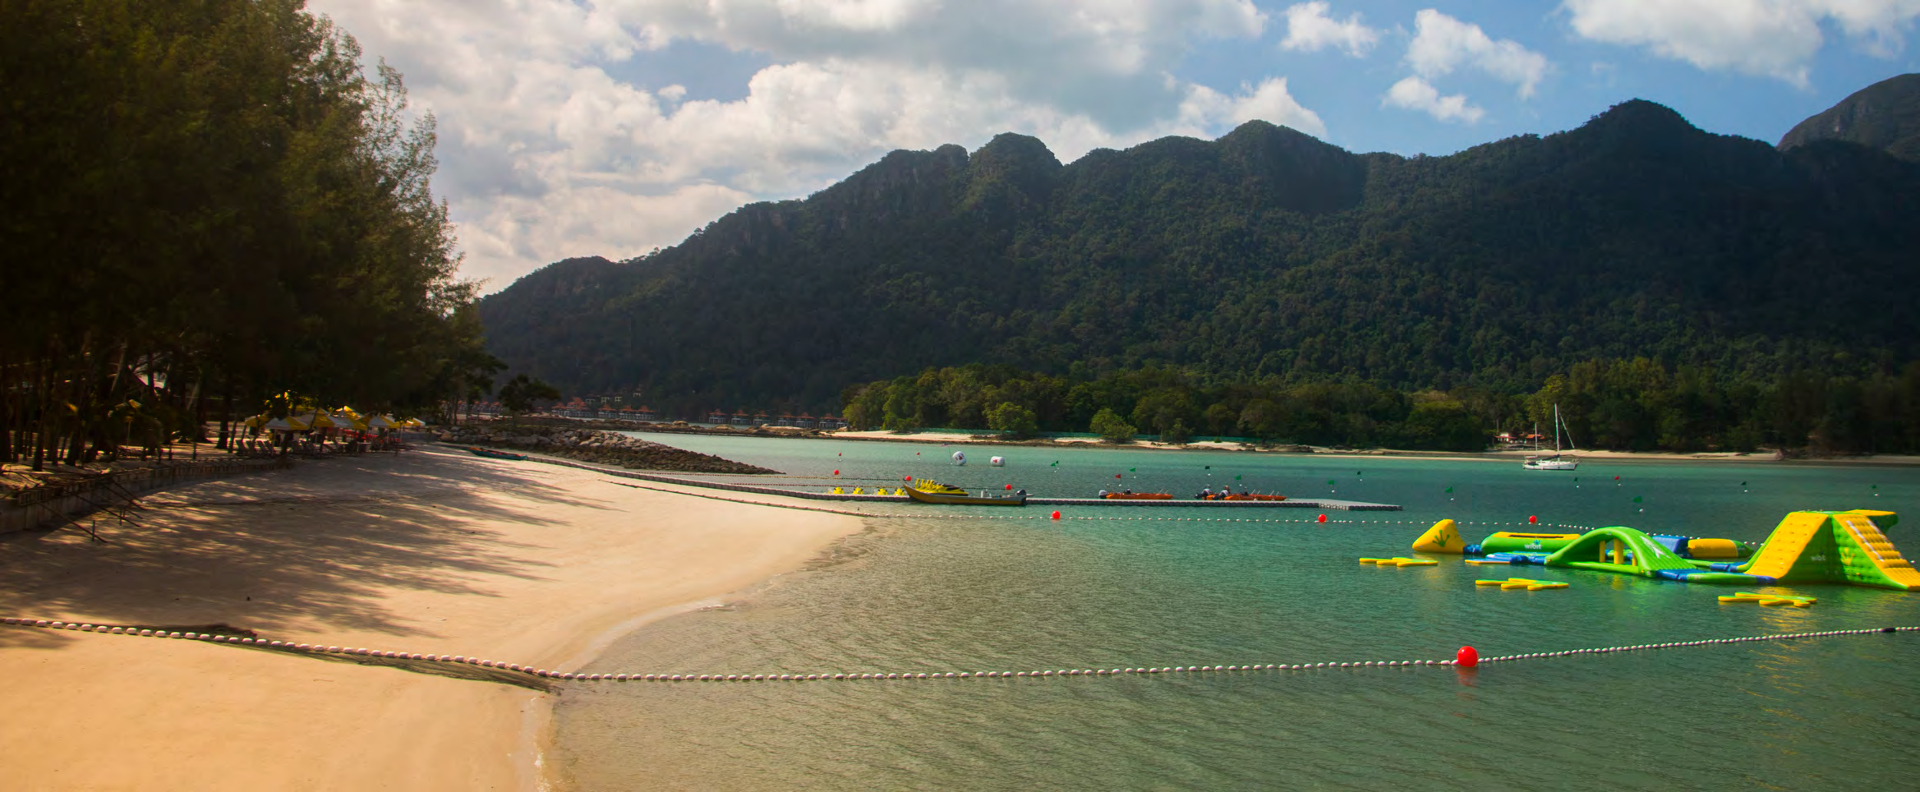 Private Island Hire In Langkawi